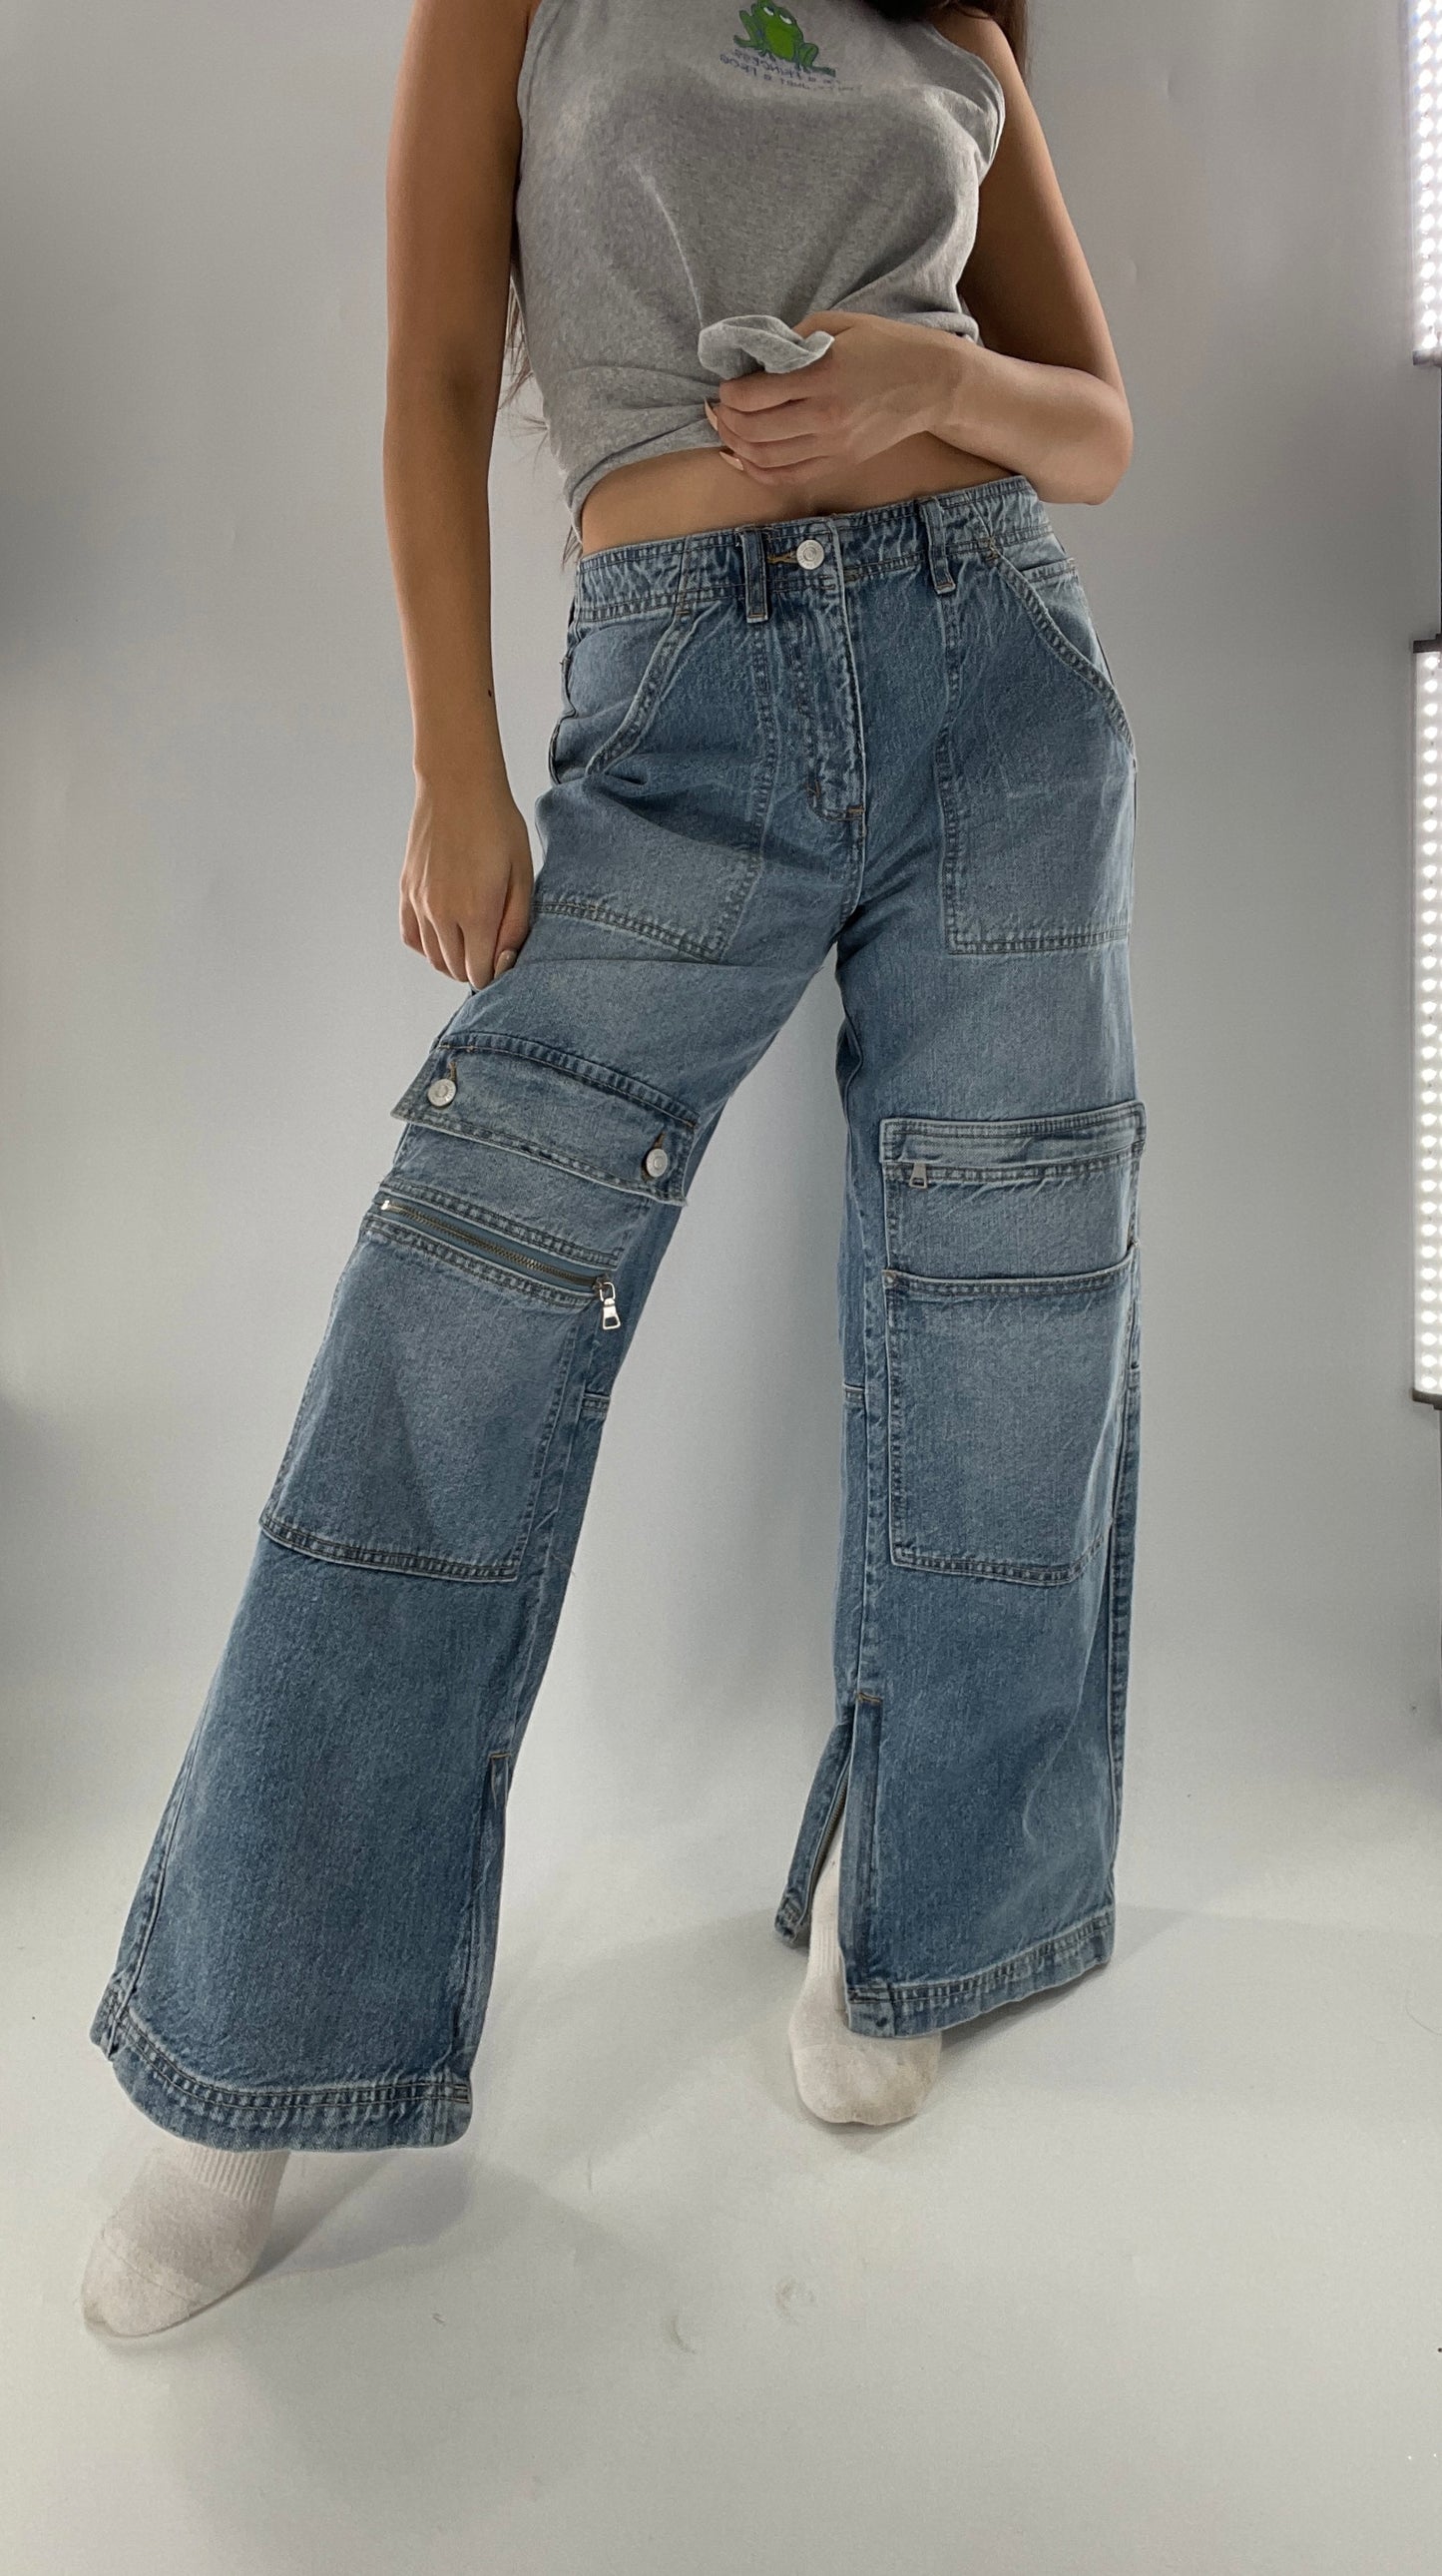 Free People Wide Leg Cargo Jeans Covered in Pockets, Zippers and stitching  (27)